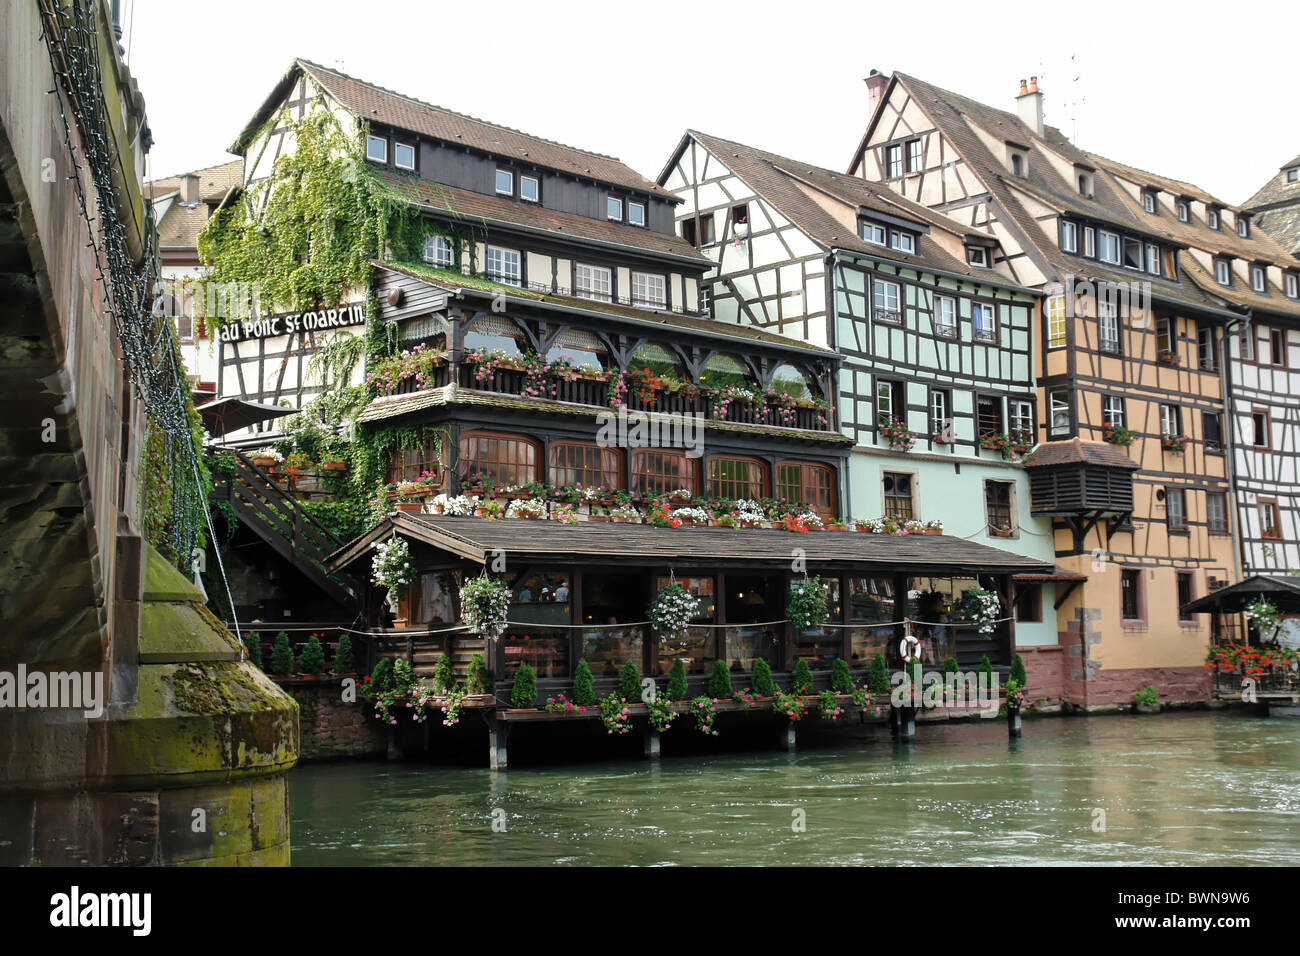 France Europe Bas-Rhin Alsace Strasbourg Strassburg medieval half-timbered houses timber framing river L'Ill Stock Photo